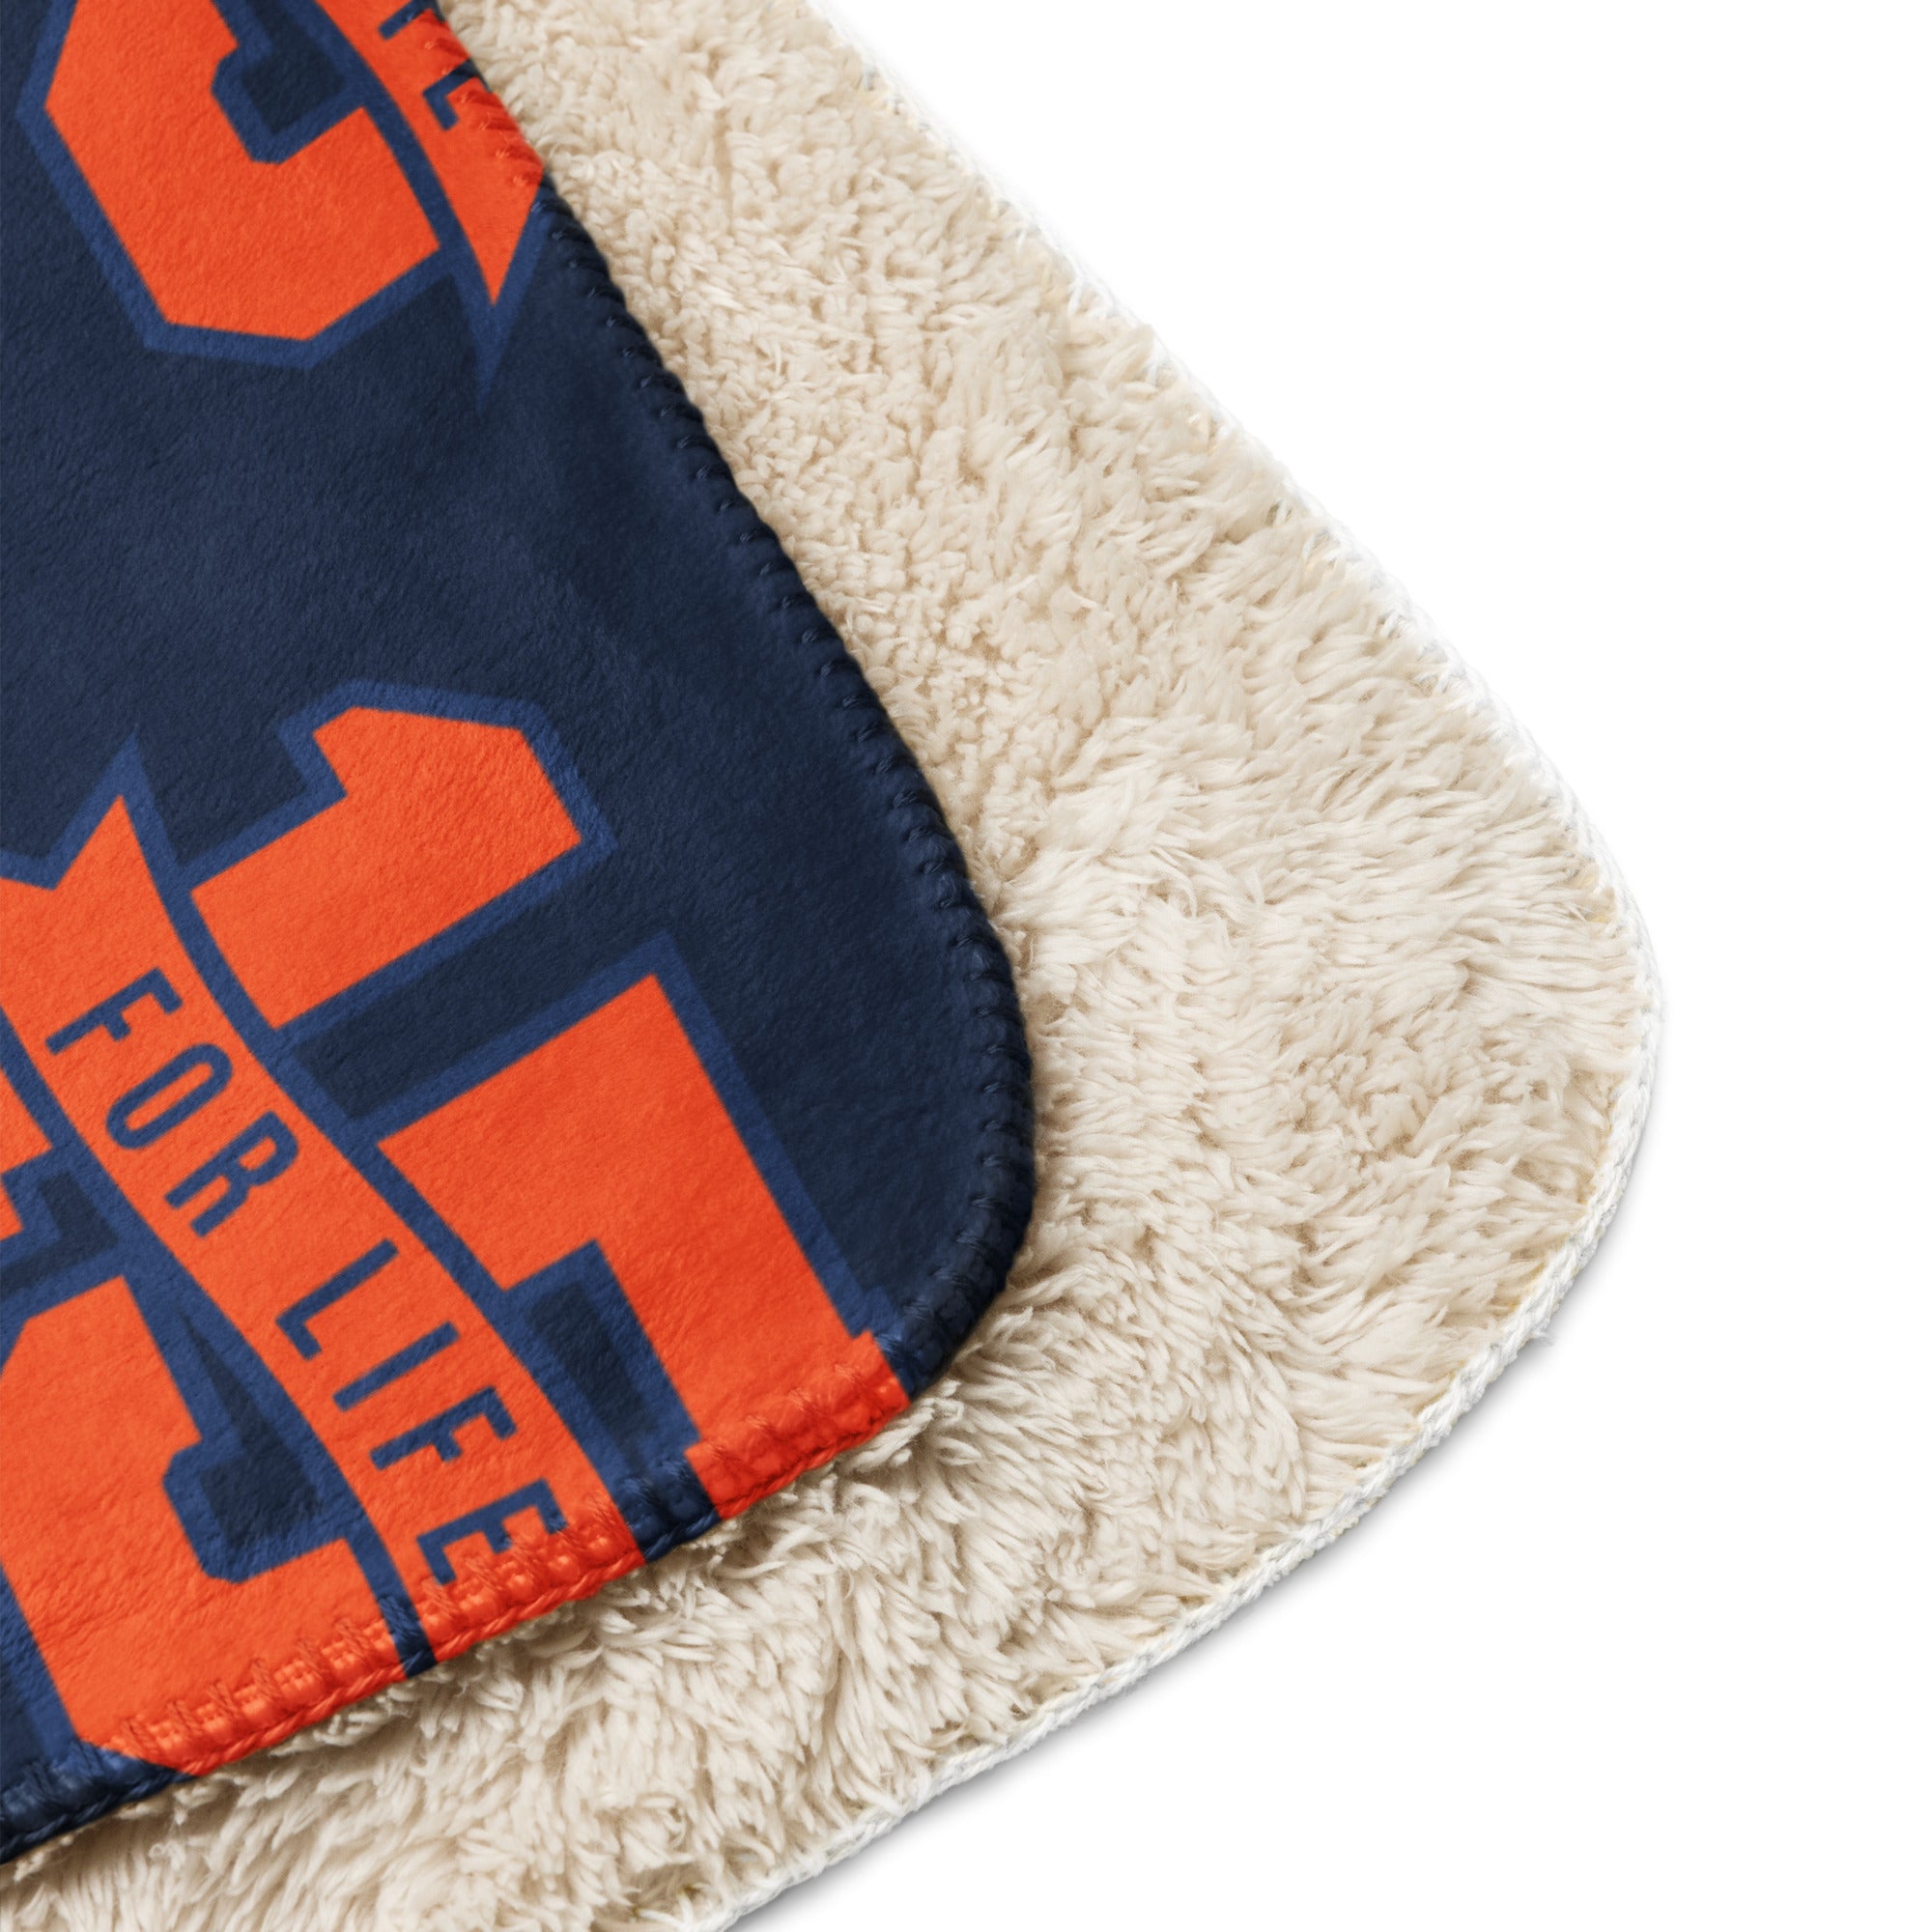 15 For Life Sherpa blanket